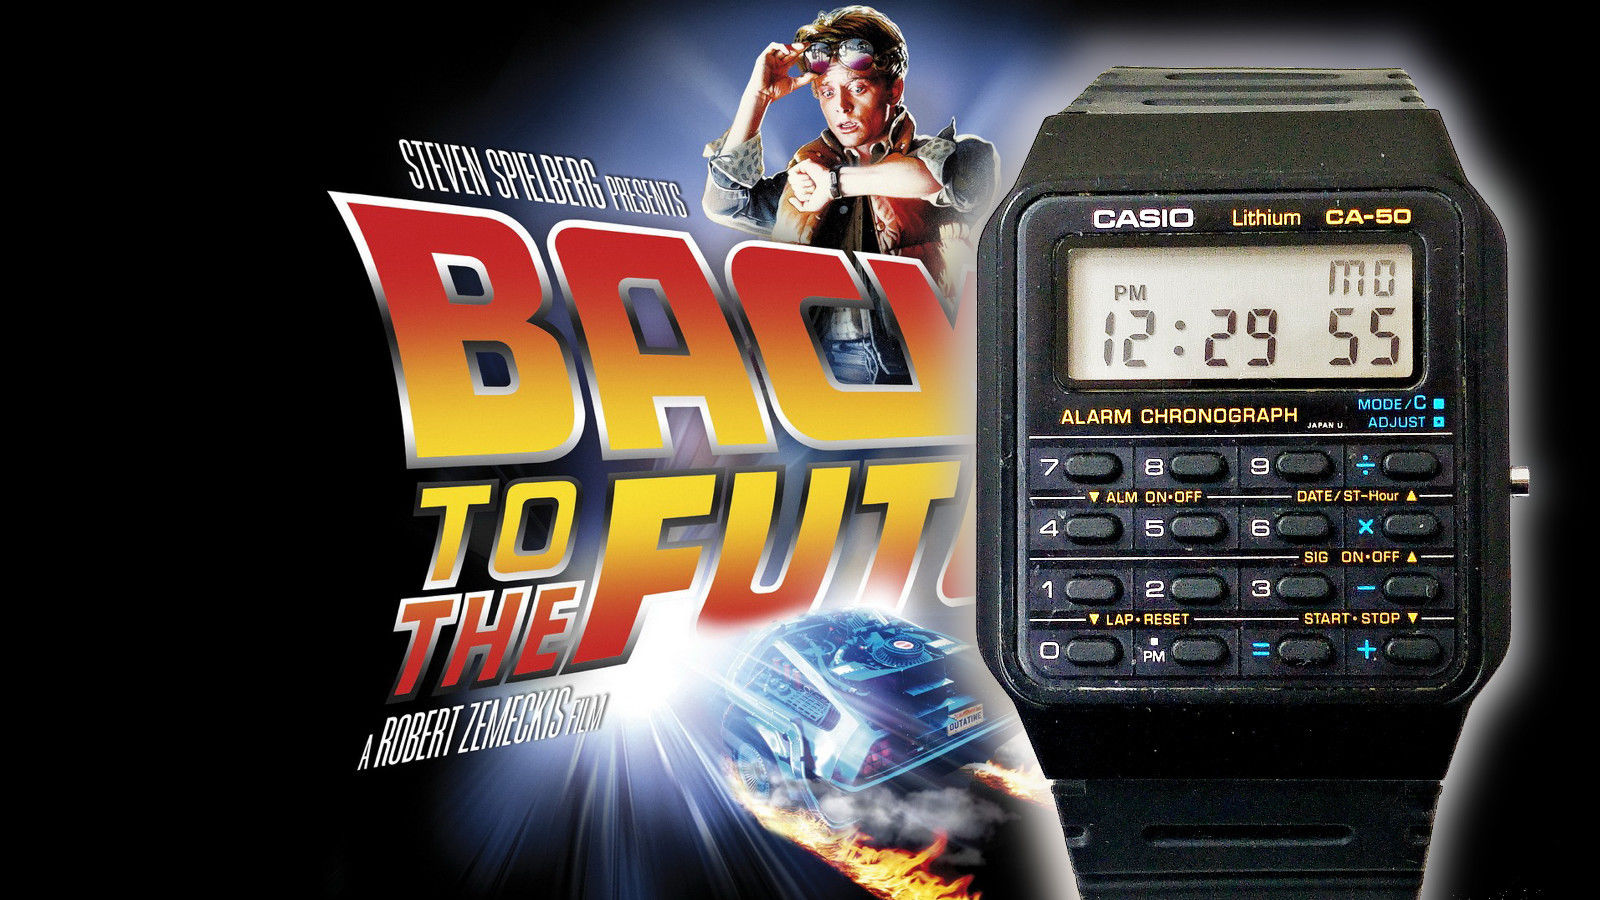 đồng hồ casio trong bộ phim back to the future